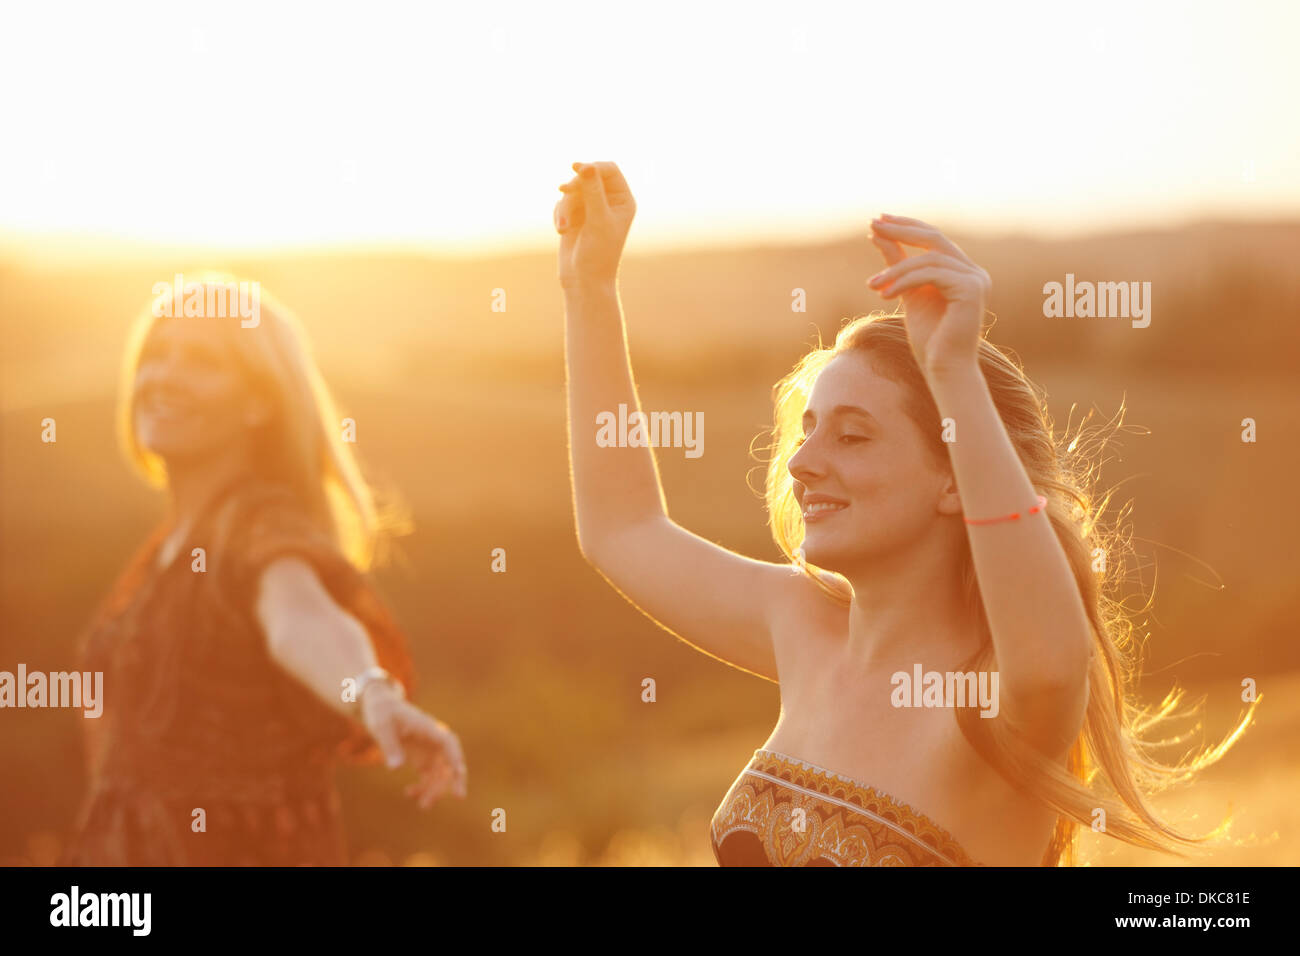 Woman and teenager dancing in field at dusk Stock Photo